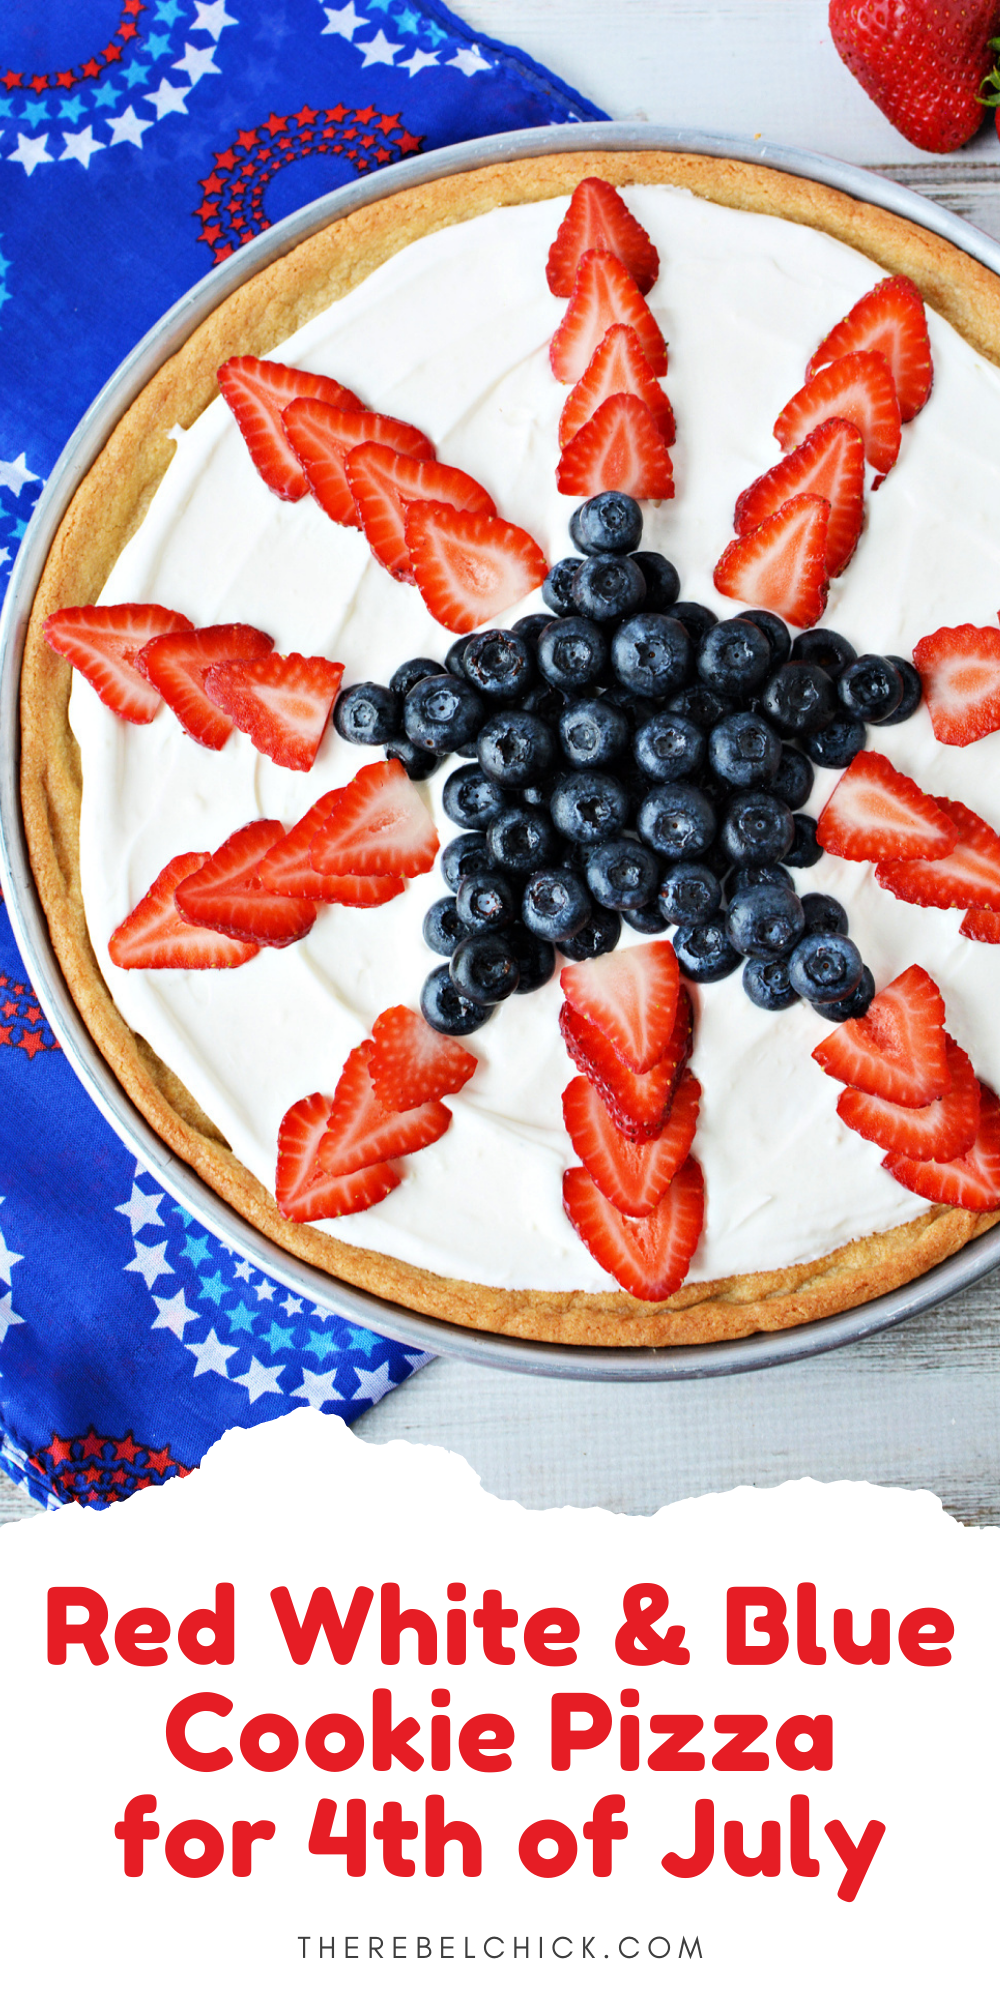 Red White and Blue Cookie Pizza for Memorial Day and 4th of July